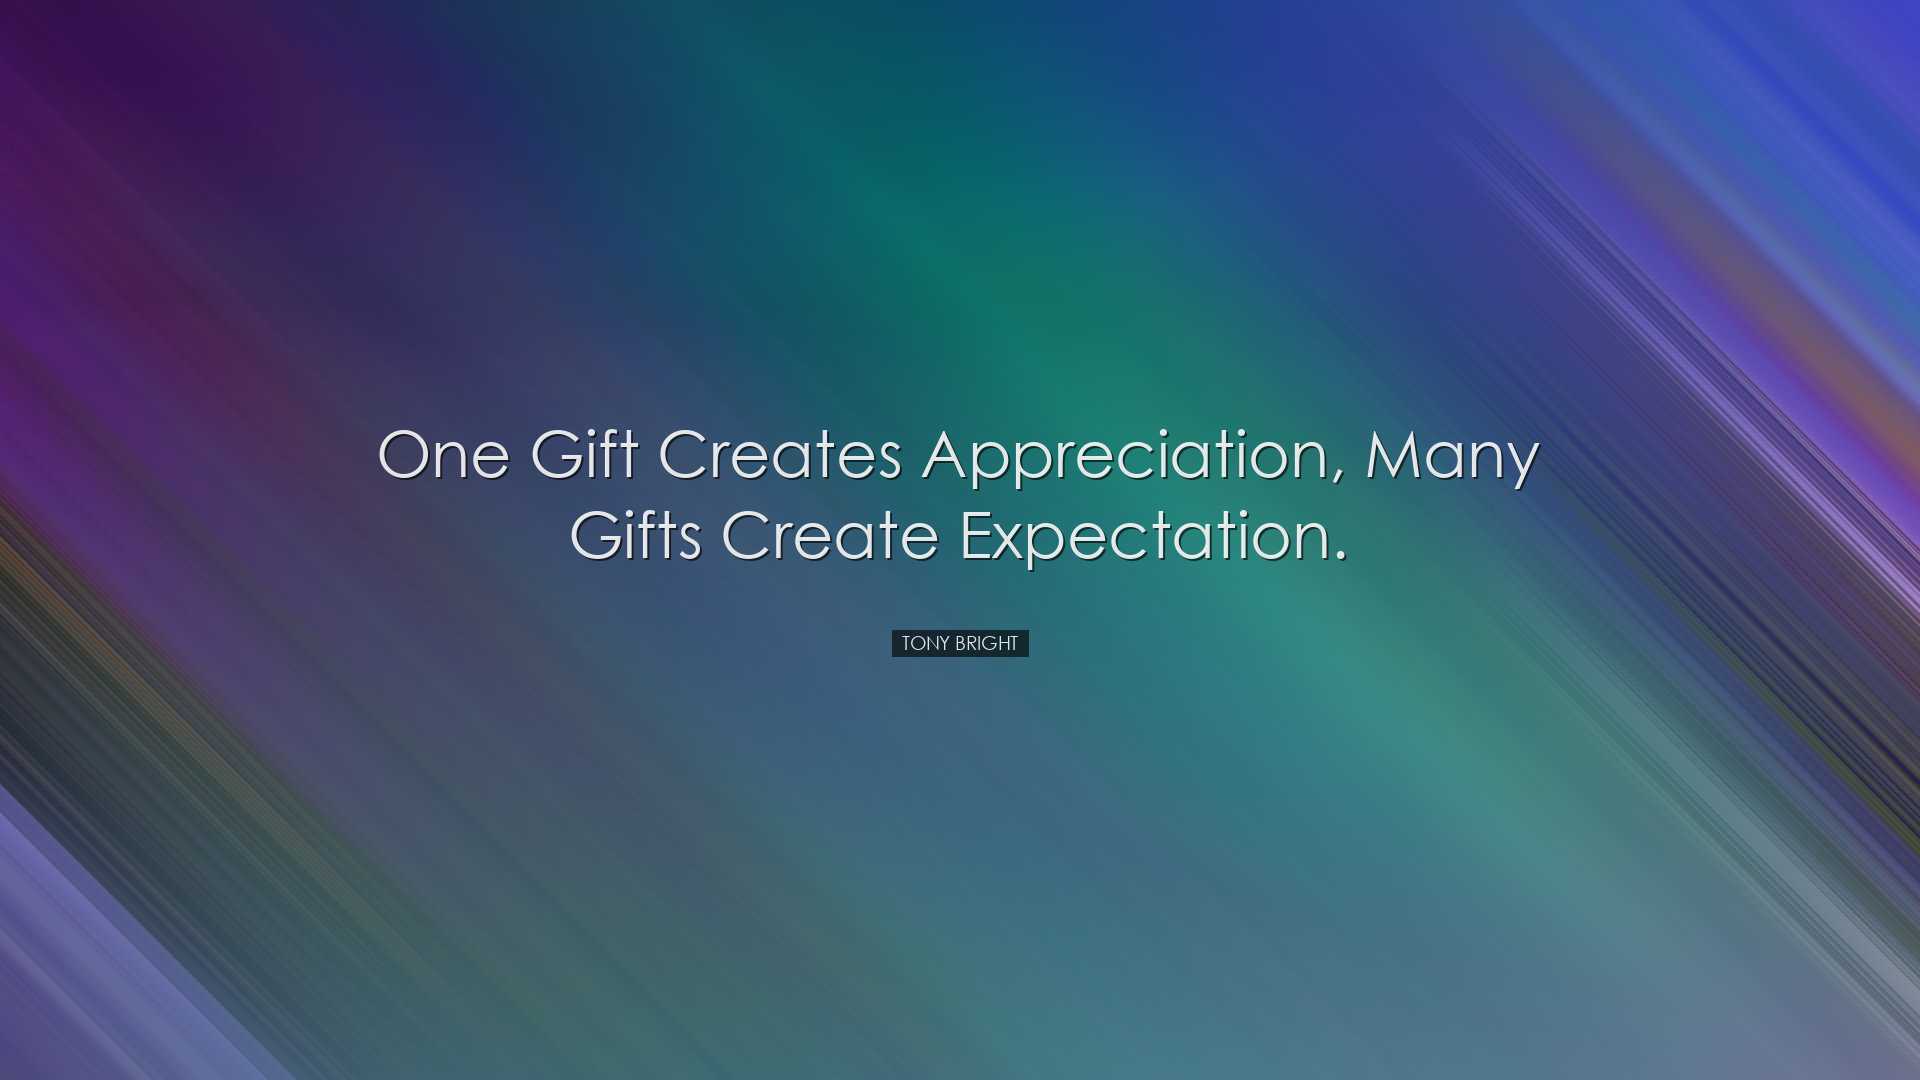 One gift creates appreciation, many gifts create expectation. - To